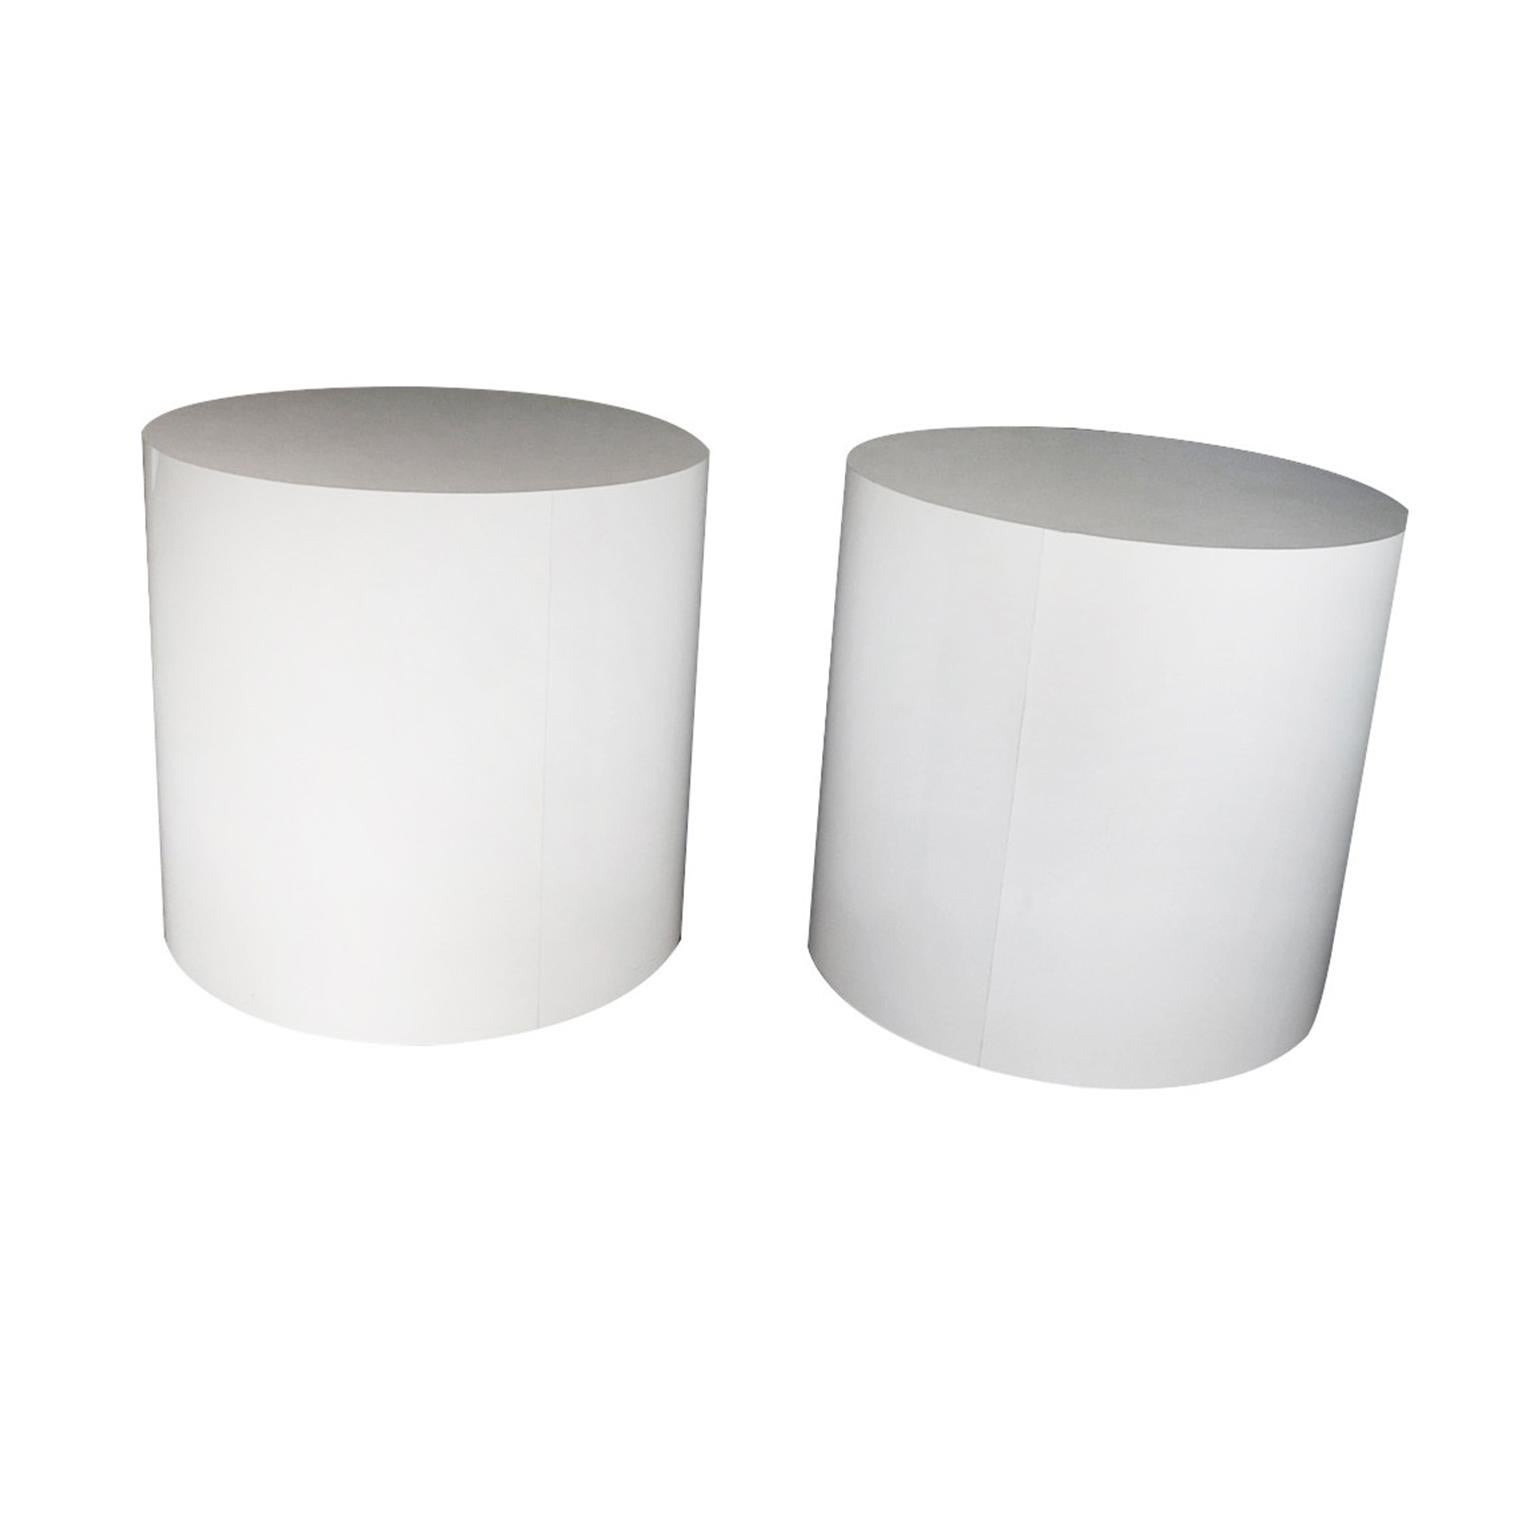 Late 20th Century Postmodern Pair of White Laminate Cylindrical Pedestal Side Tables